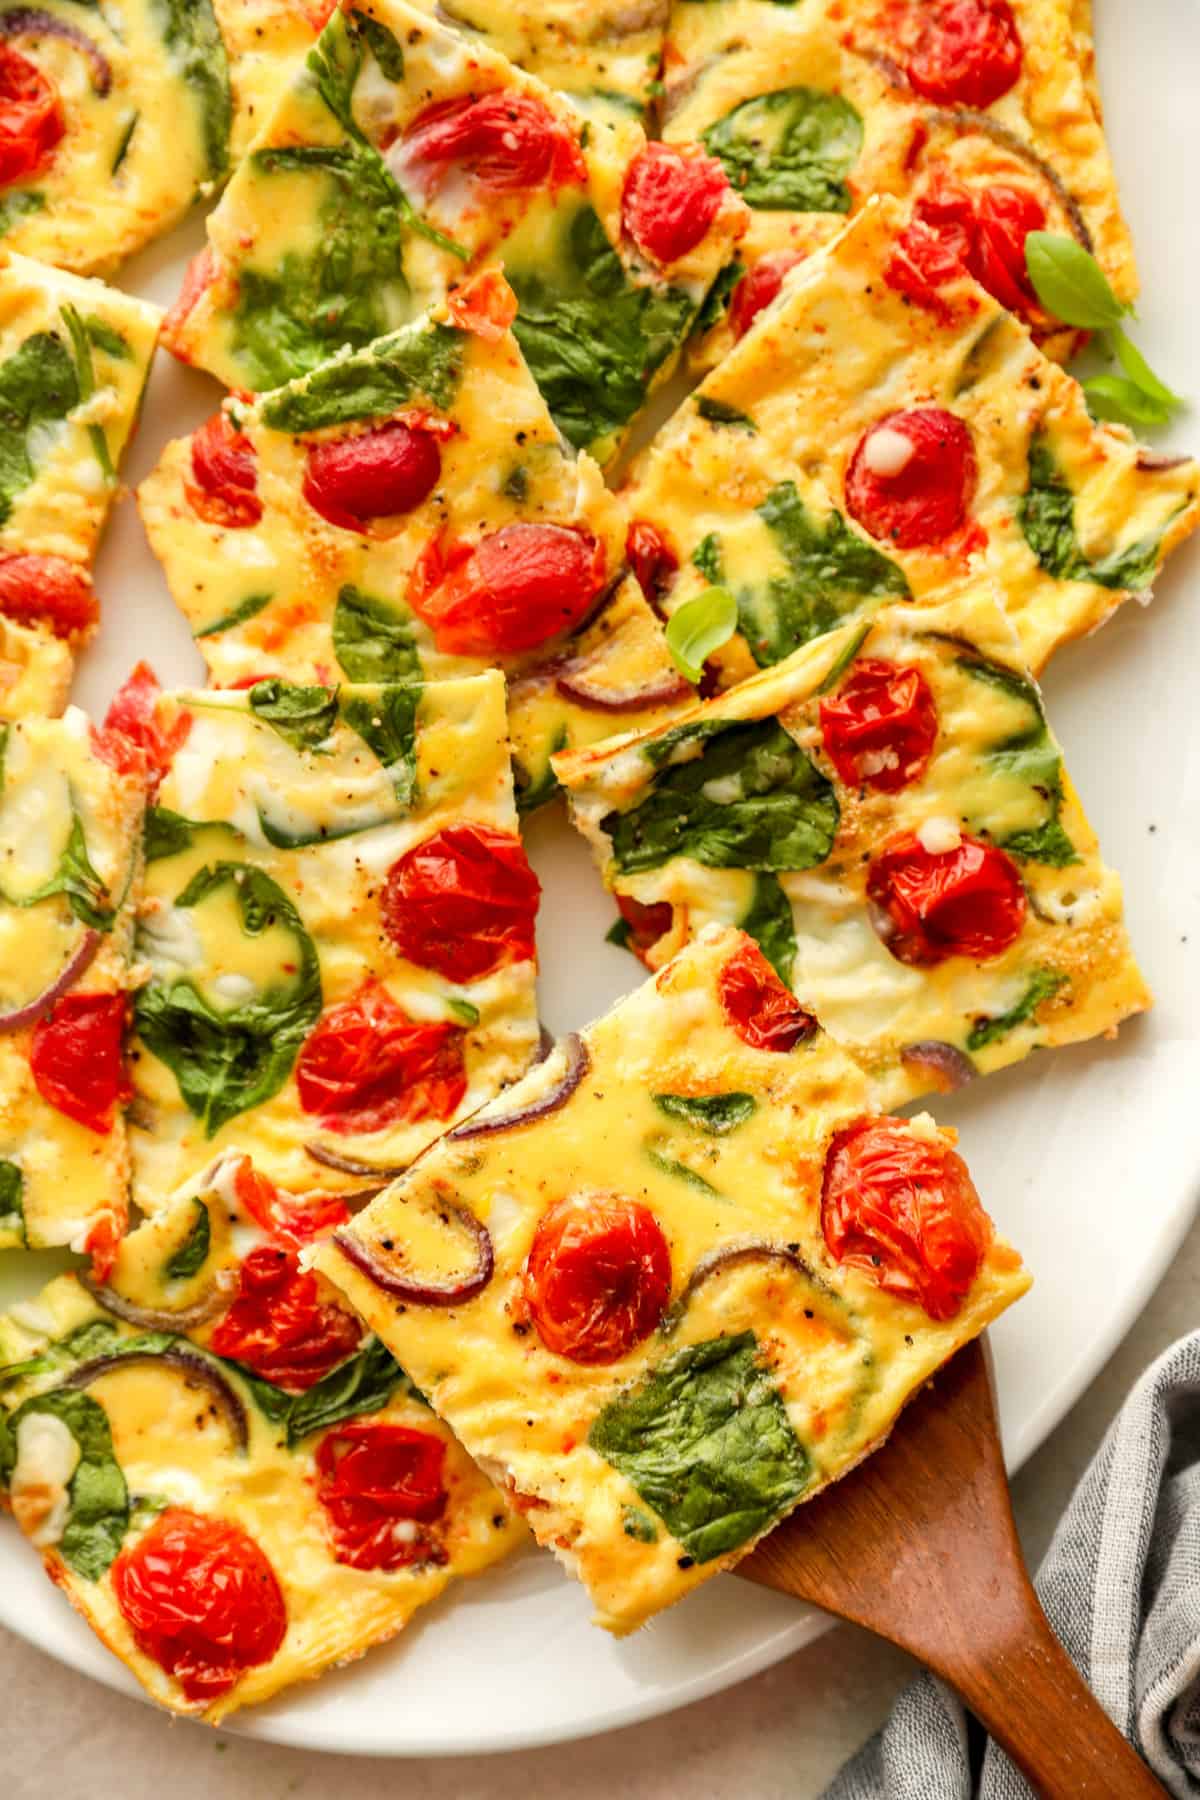 Pictured above are square egg frittata slices with spinach and tomatoes on a plate.